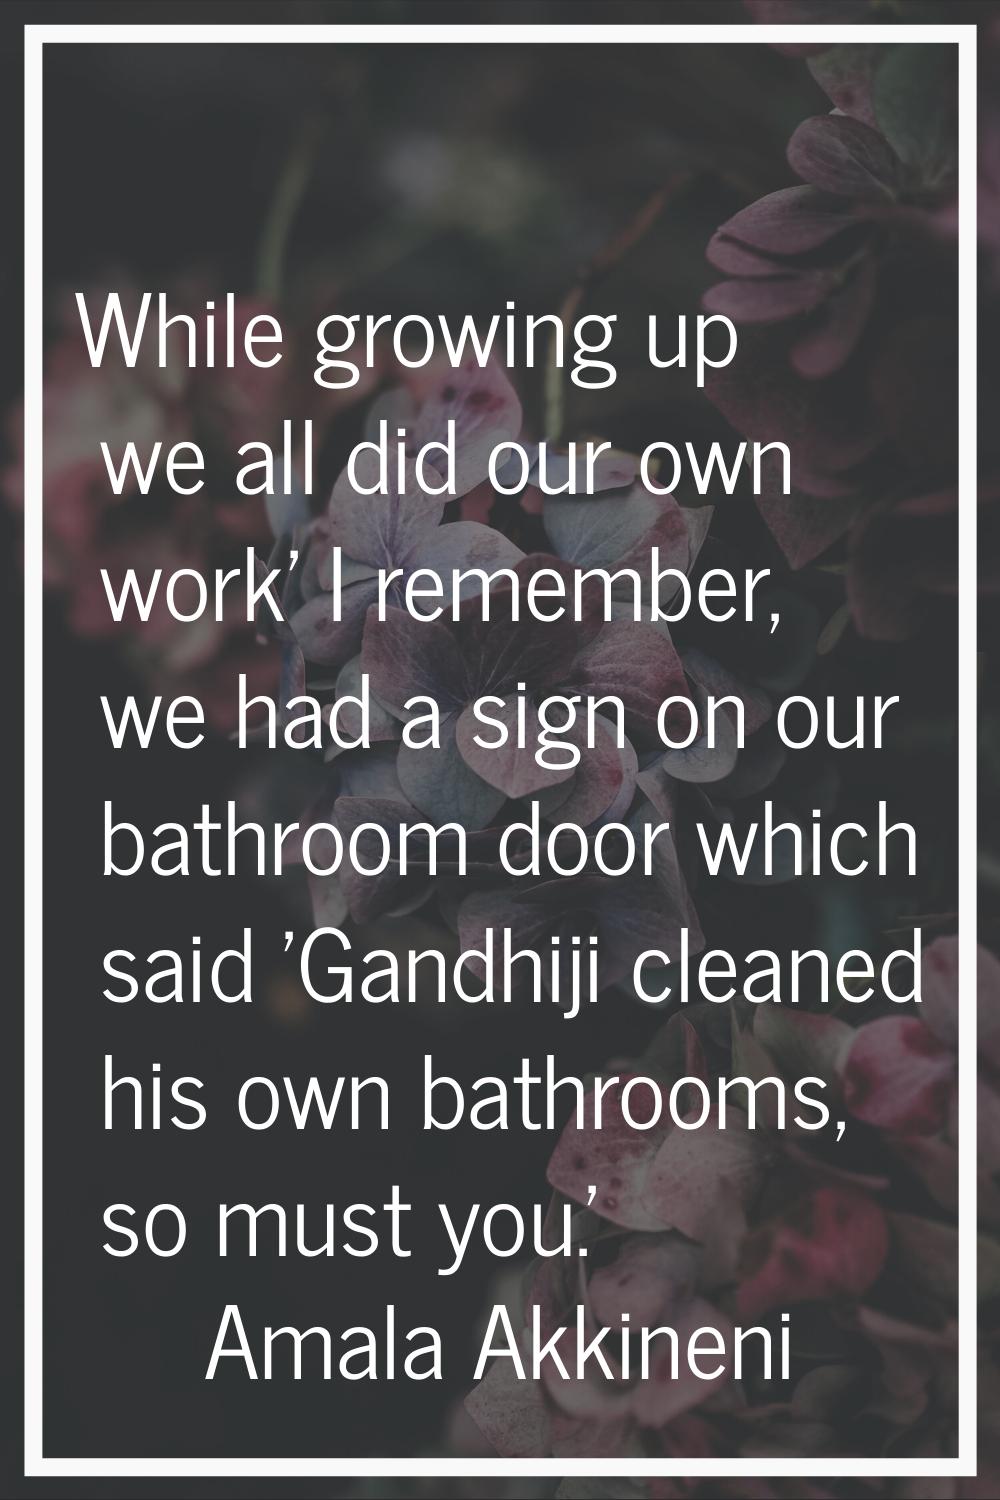 While growing up we all did our own work' I remember, we had a sign on our bathroom door which said